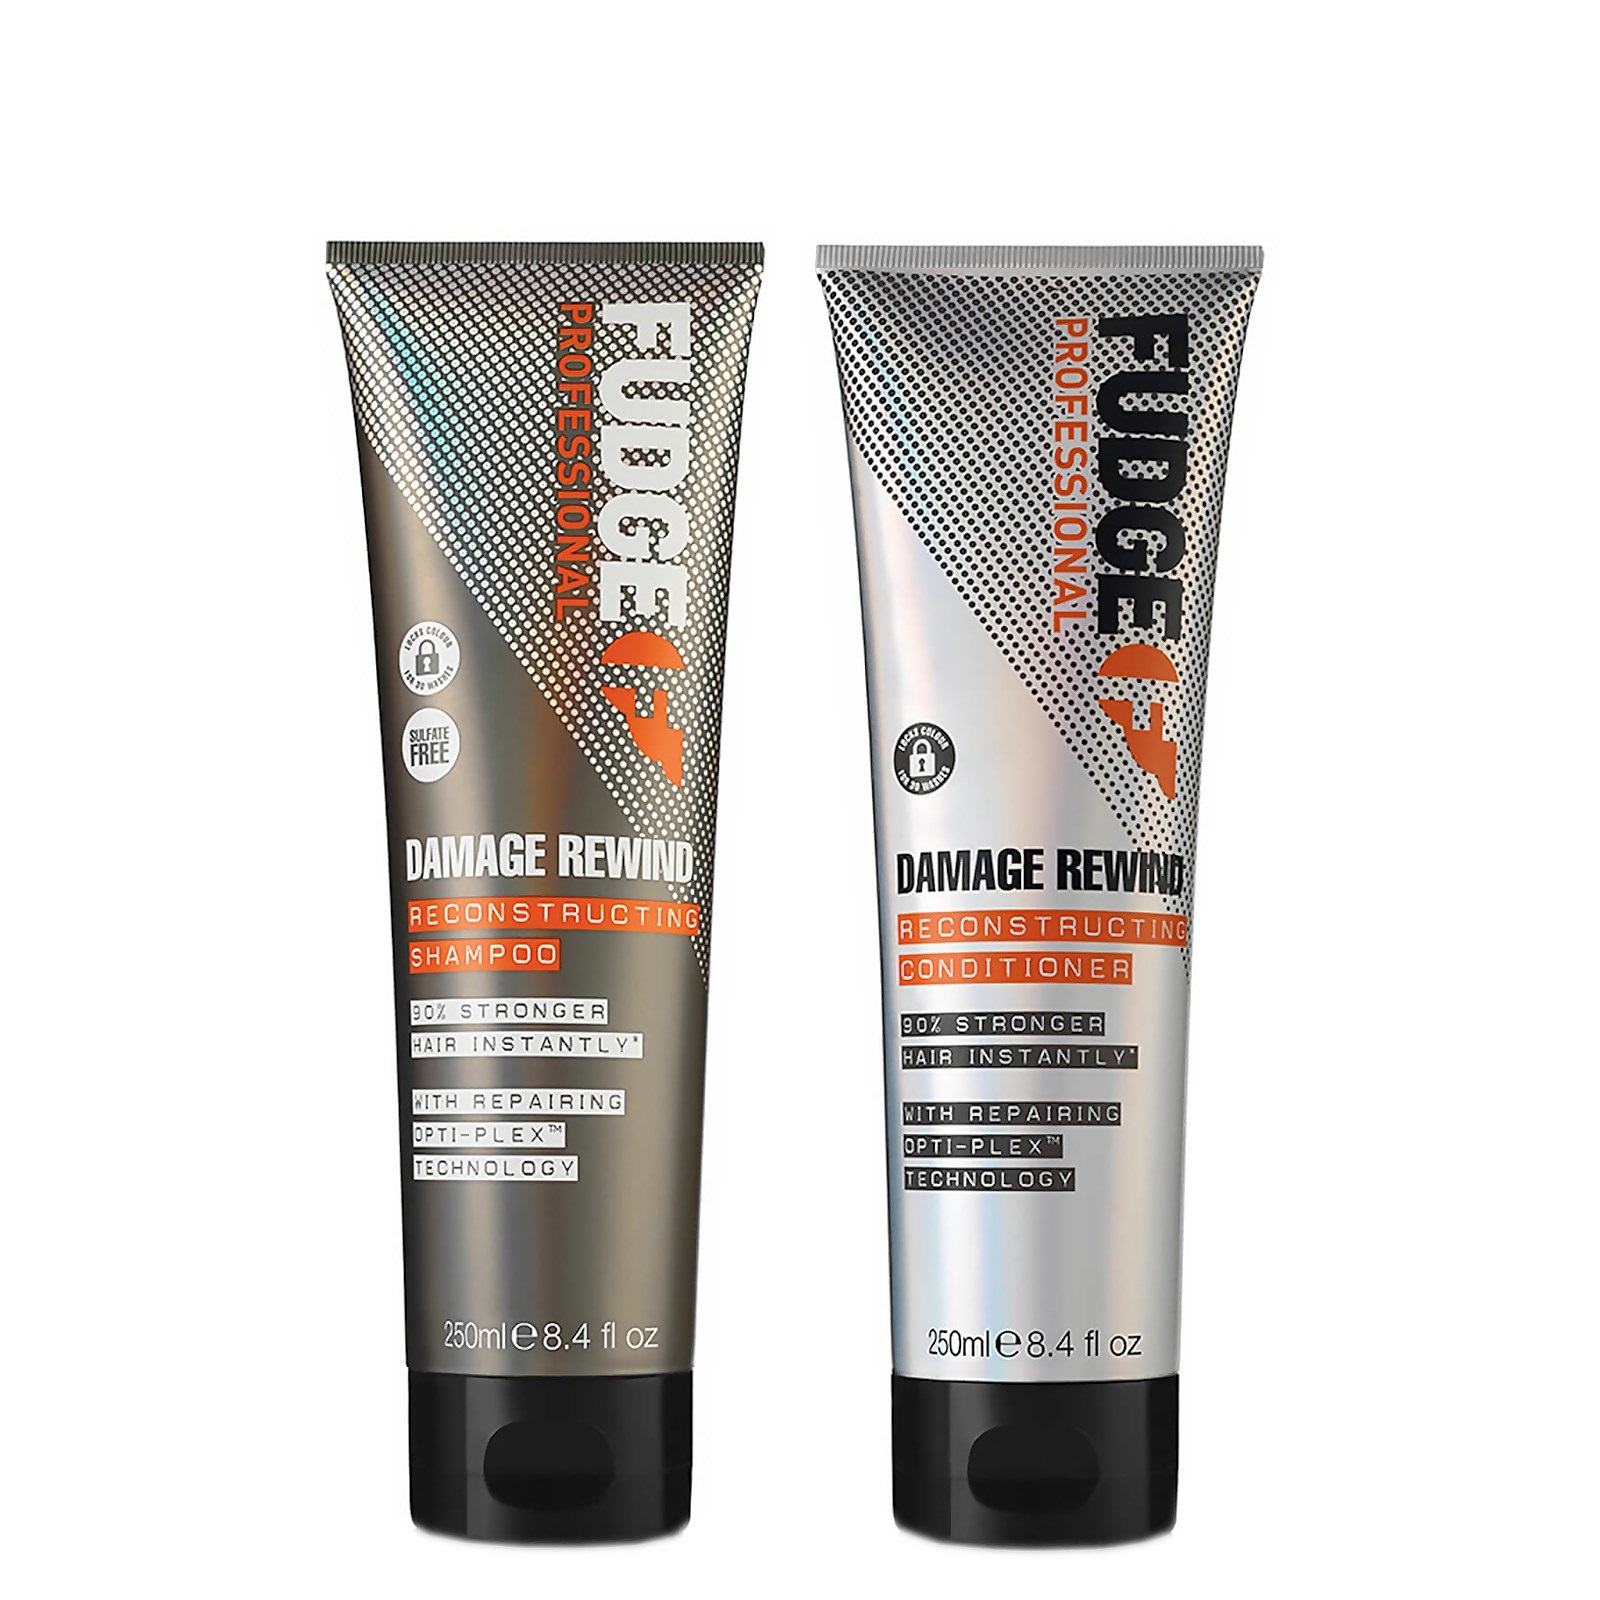 Fudge UK: Save 20% on selected Hair Care Bundles and Free Gift